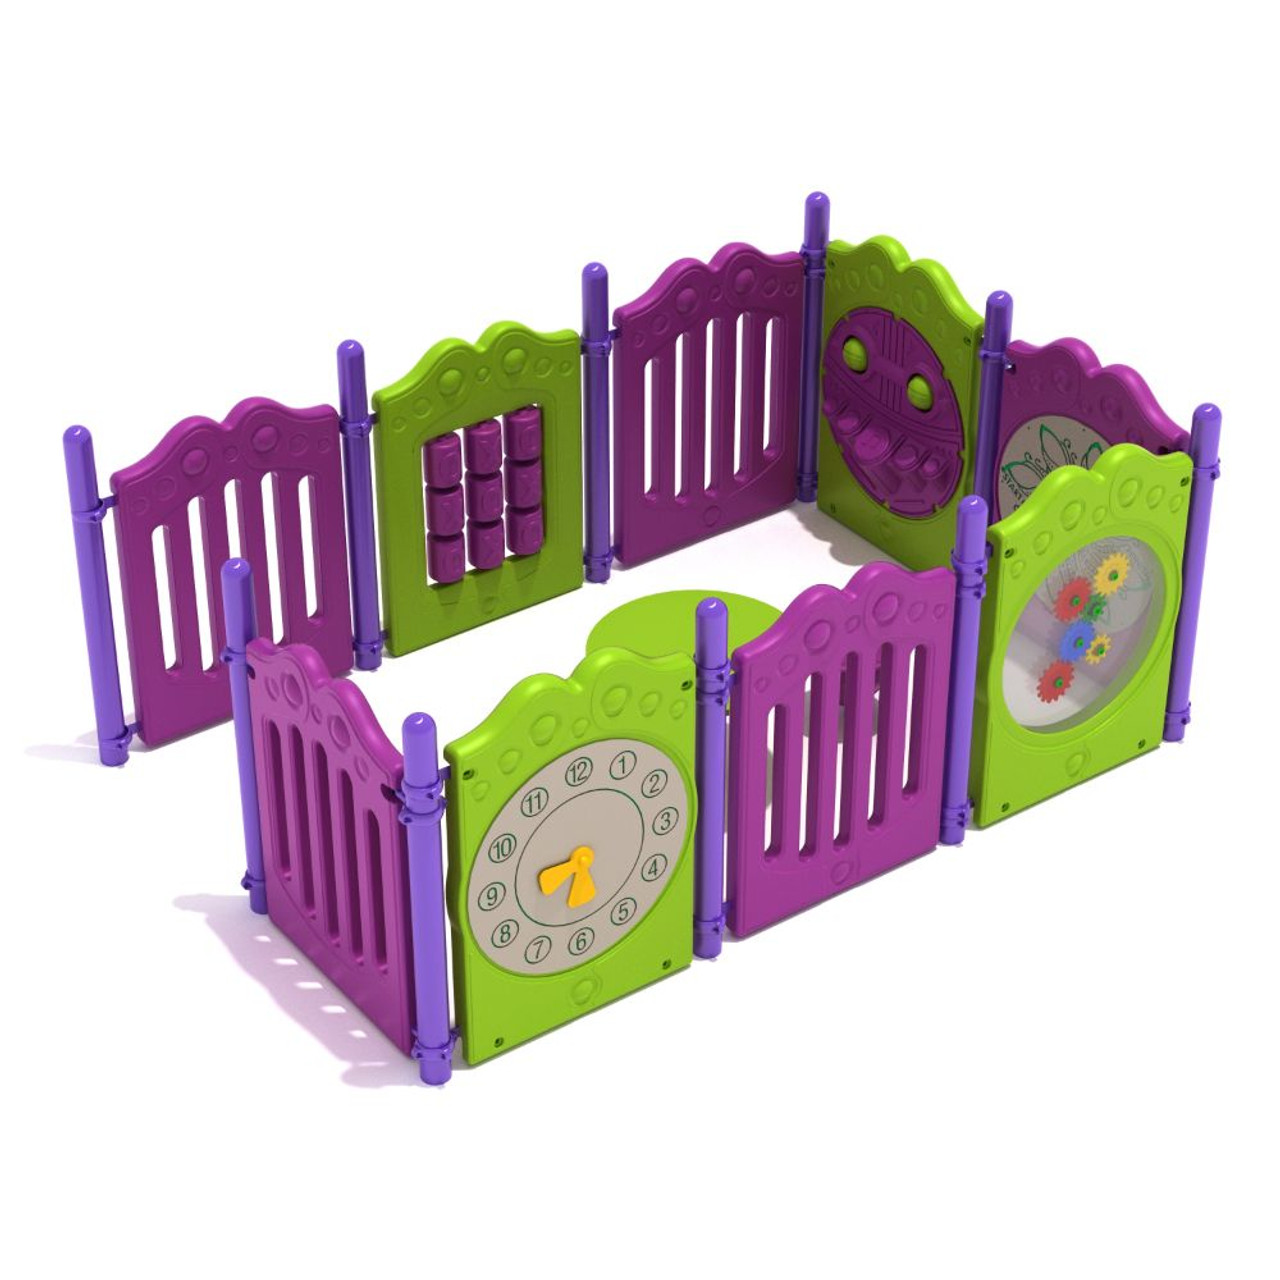 Hartselle Playset - colorful